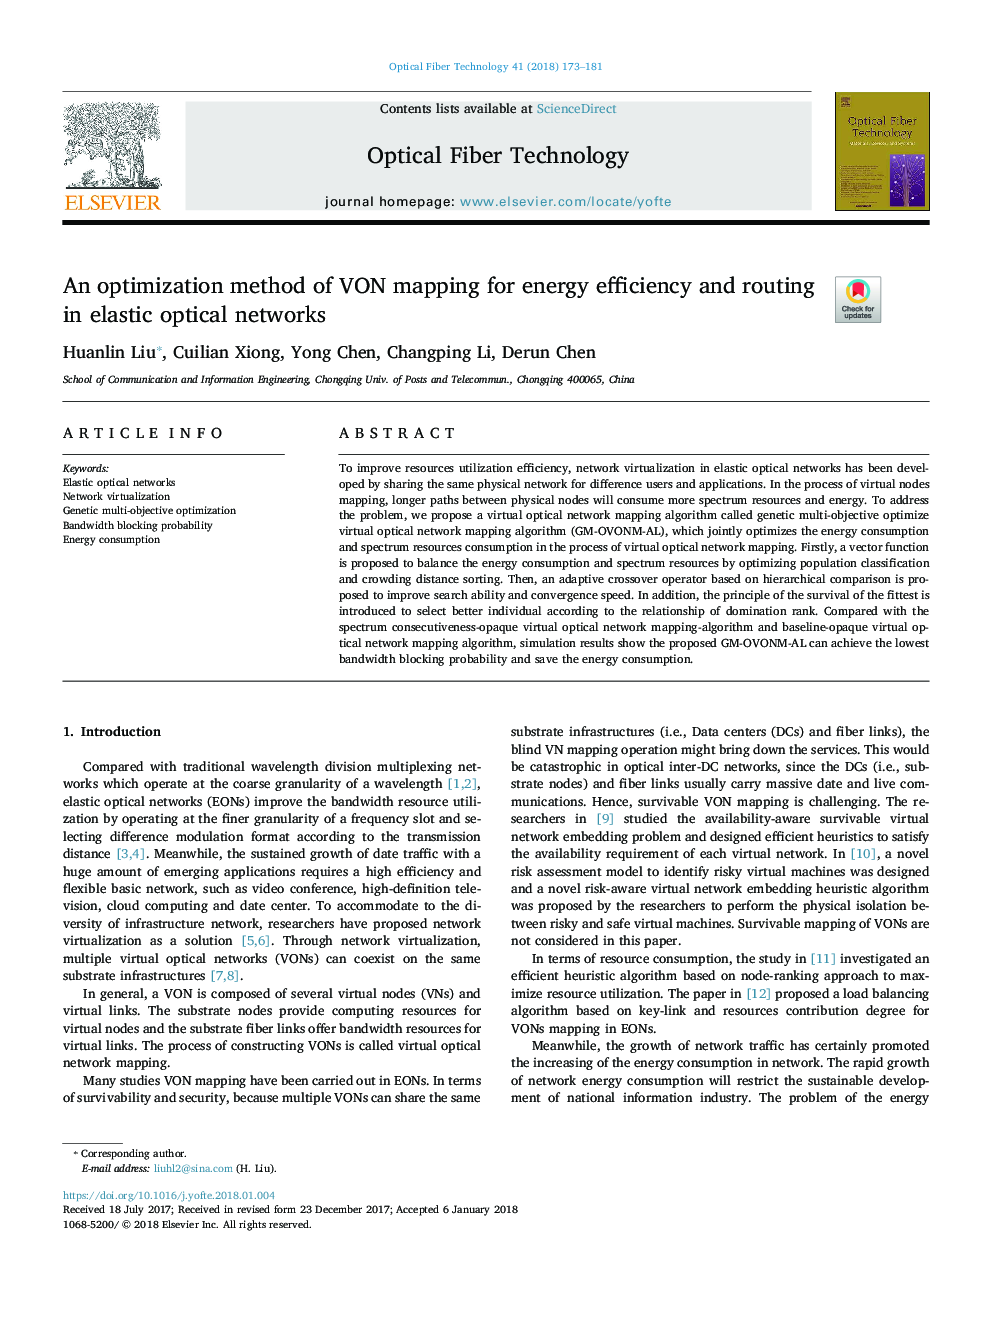 An optimization method of VON mapping for energy efficiency and routing in elastic optical networks